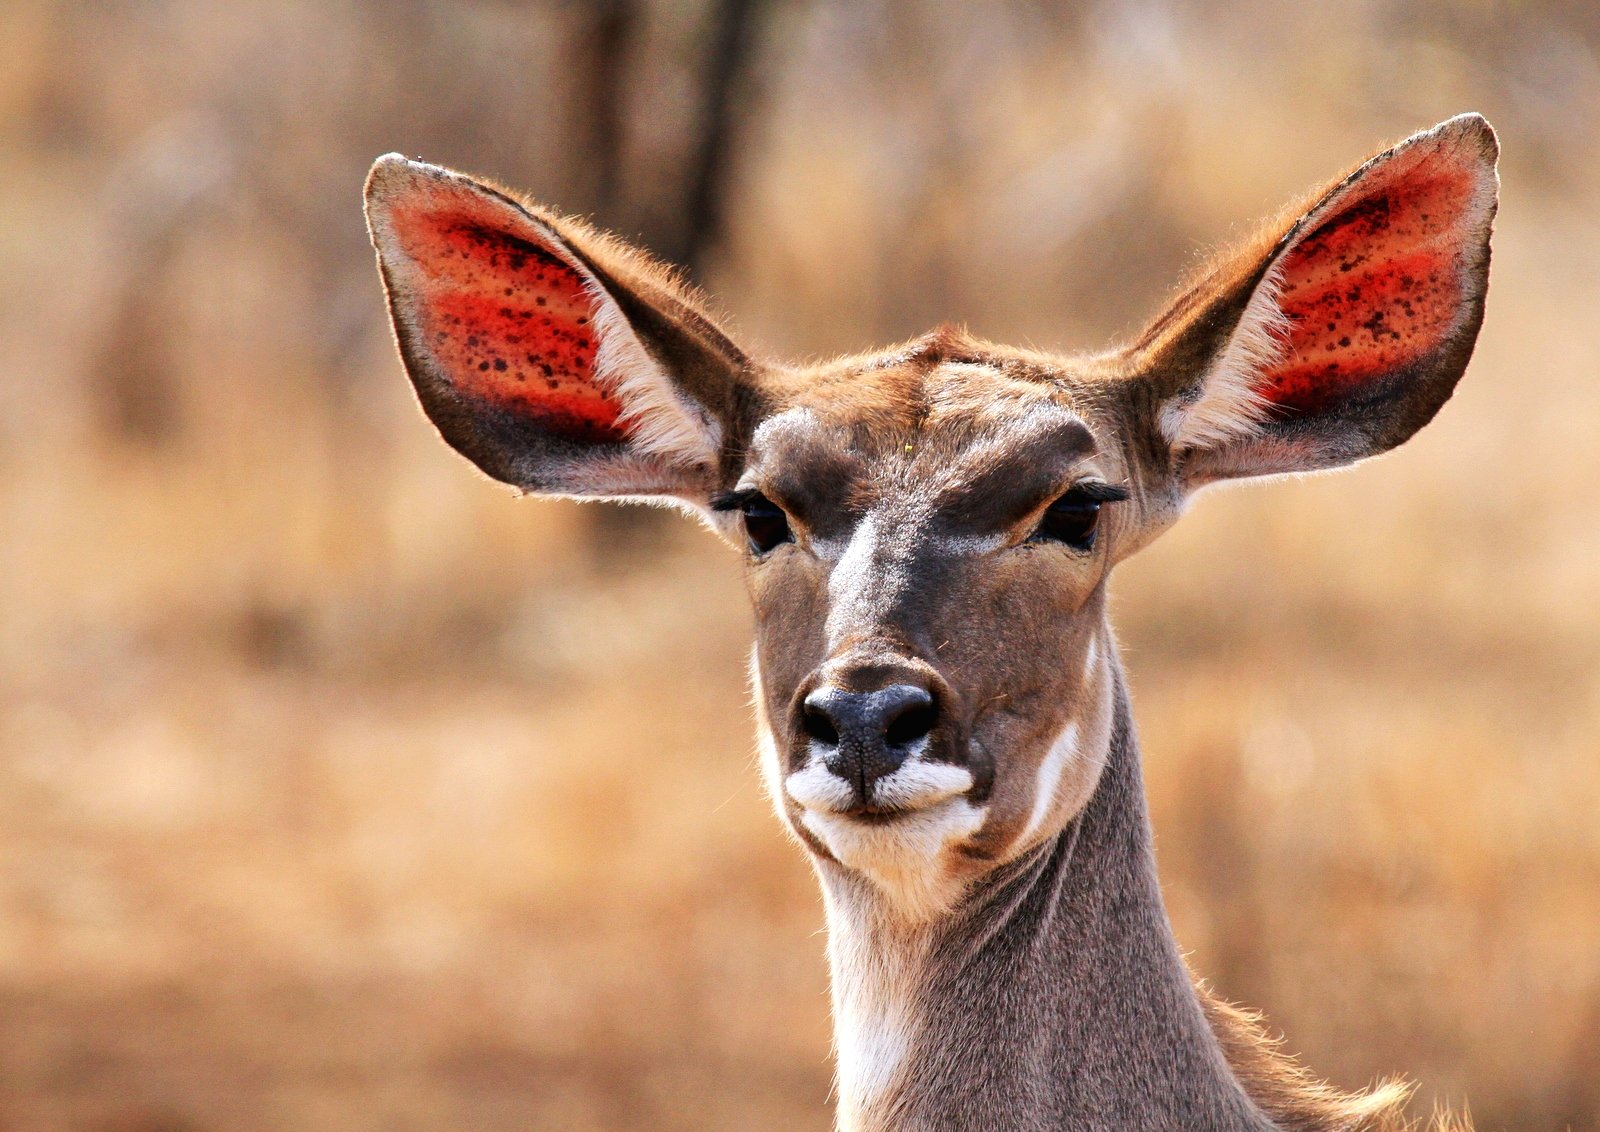 a antelope with large red ears looks directly into the camera